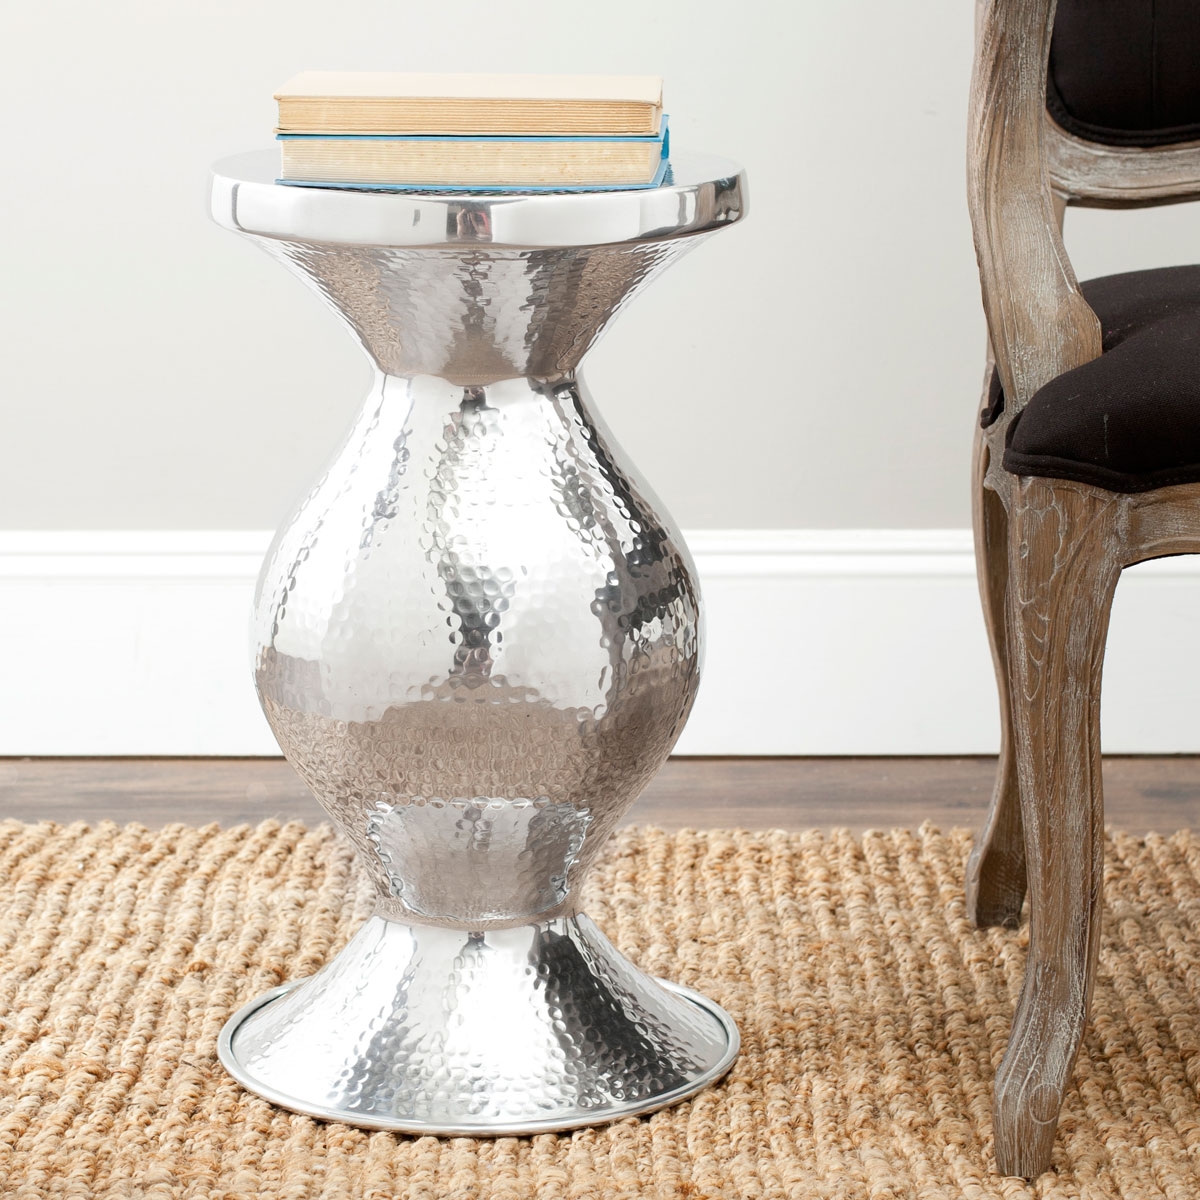 ASTRID SMALL HAMMERED STOOL - Image 1